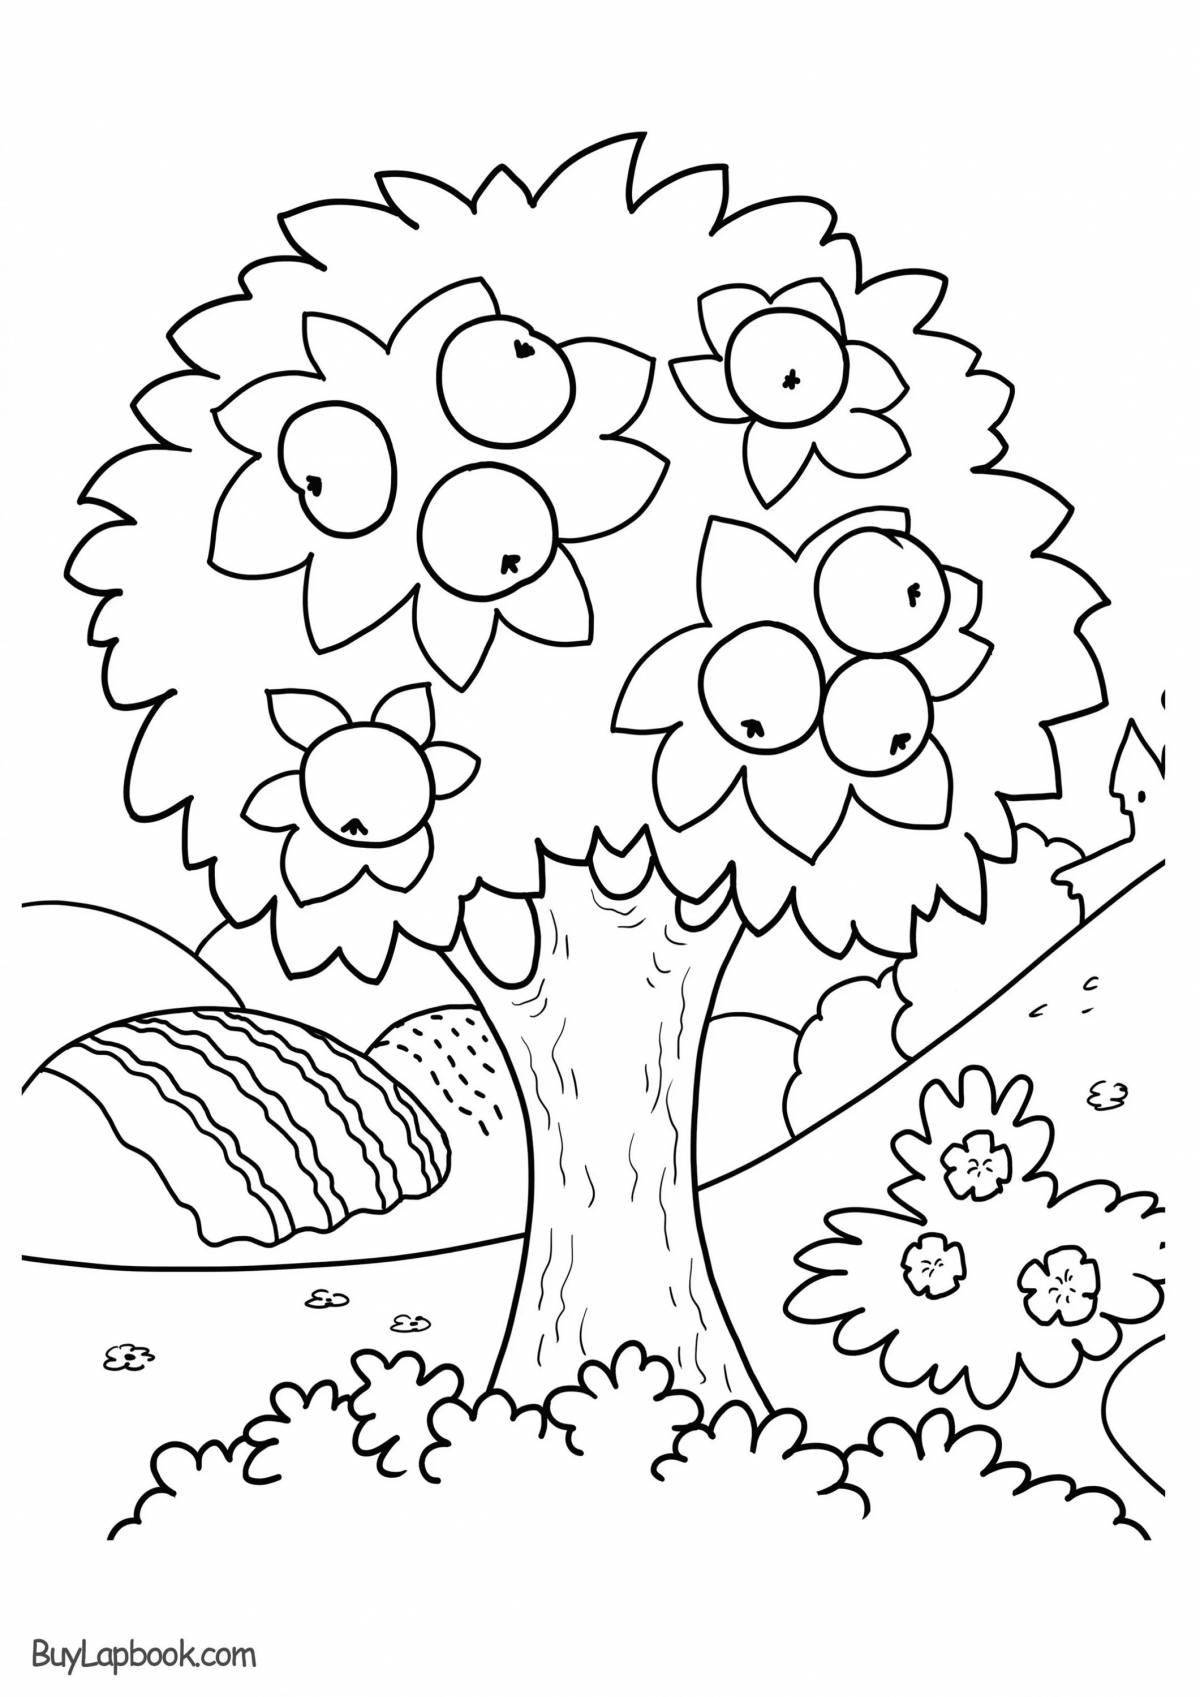 Fun coloring tree with apples